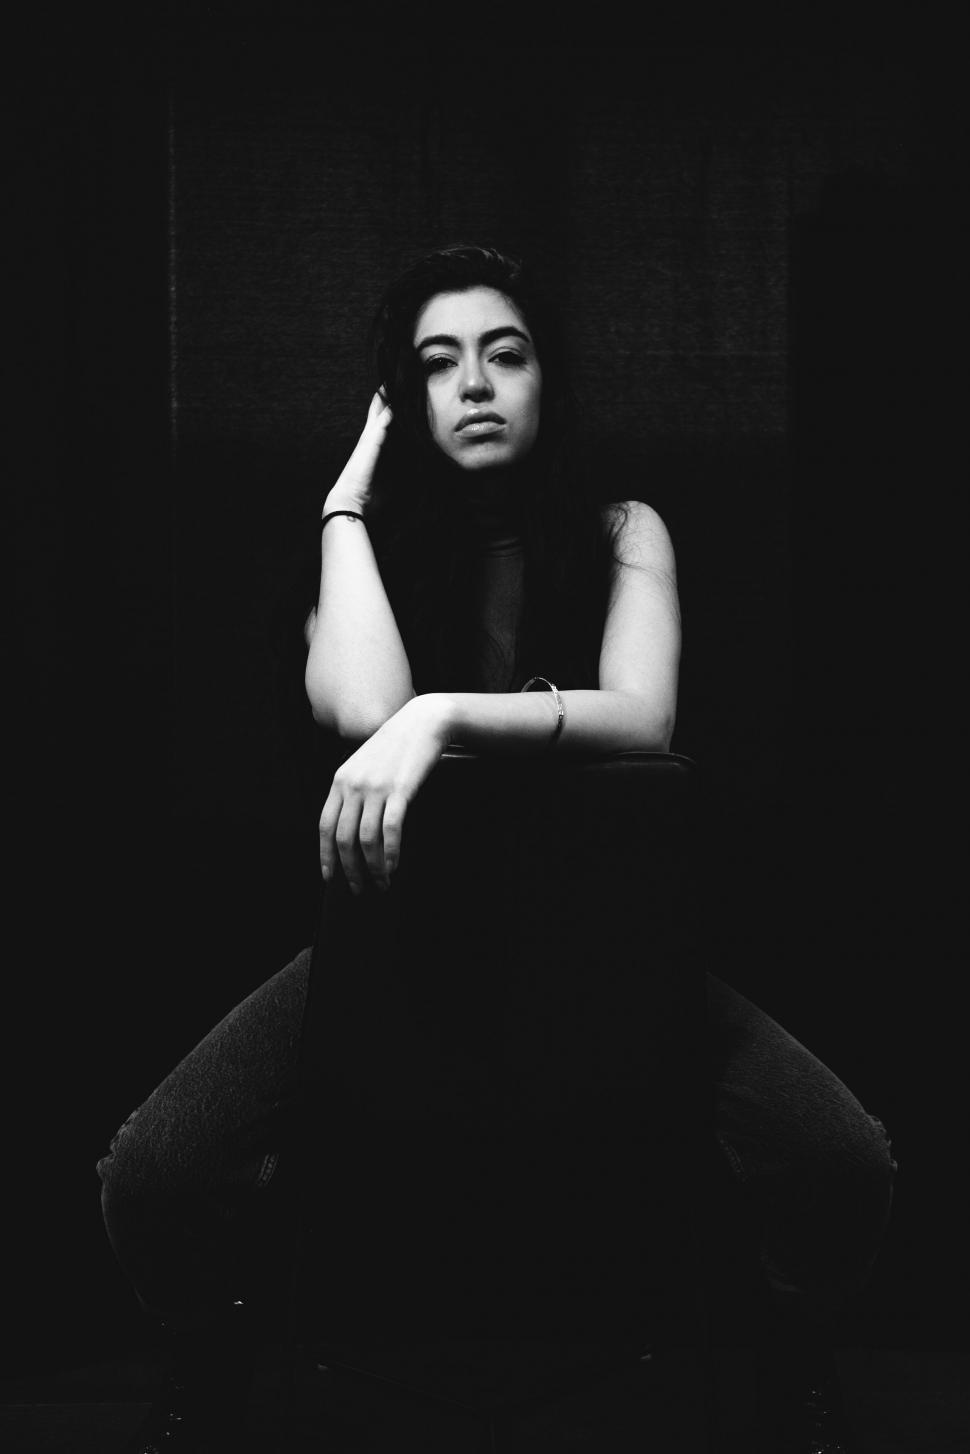 Free Image of Monochrome image of woman in introspective pose 